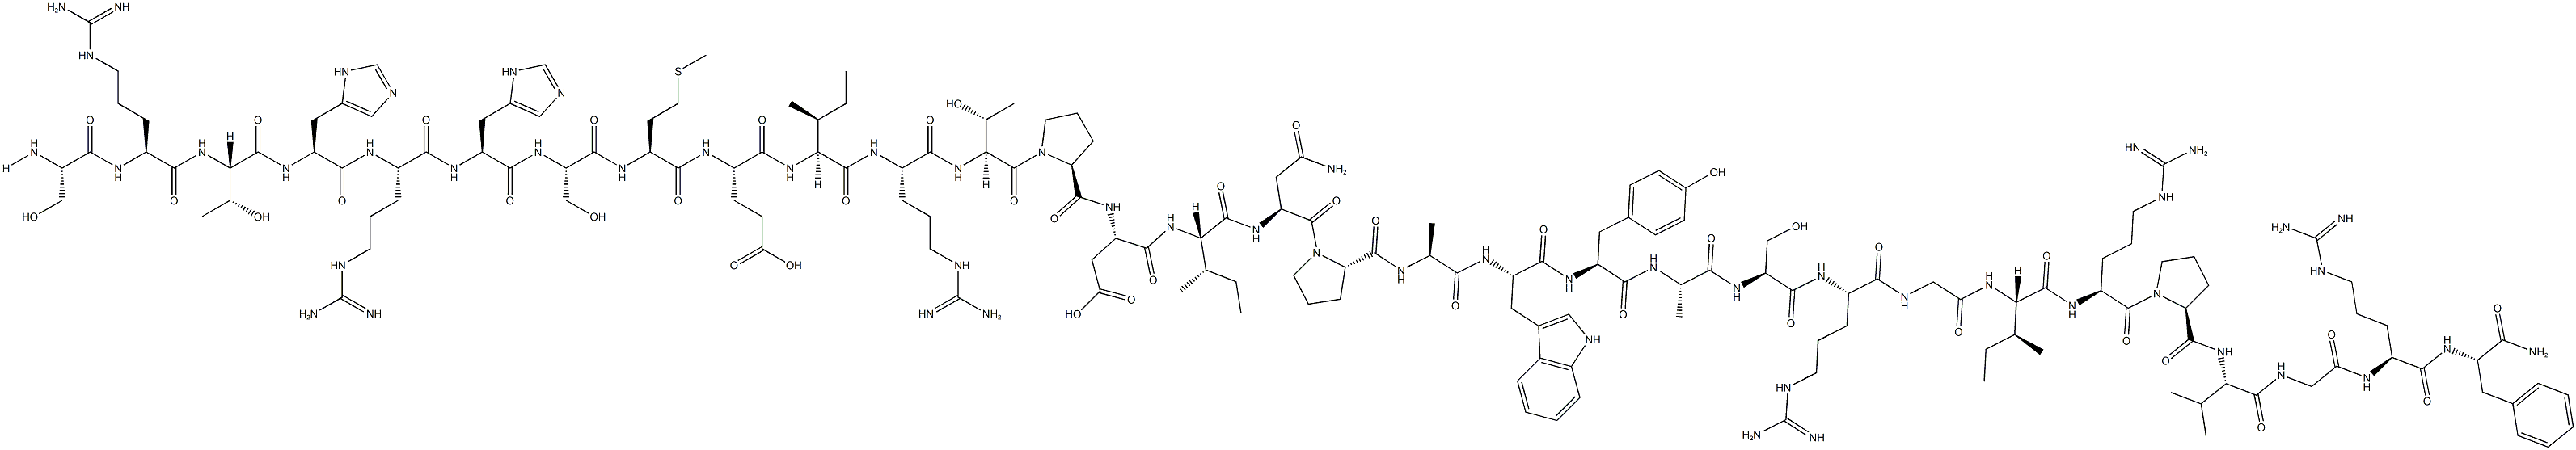 Prolactin-Releasing Peptide (1-31) (human) Structure